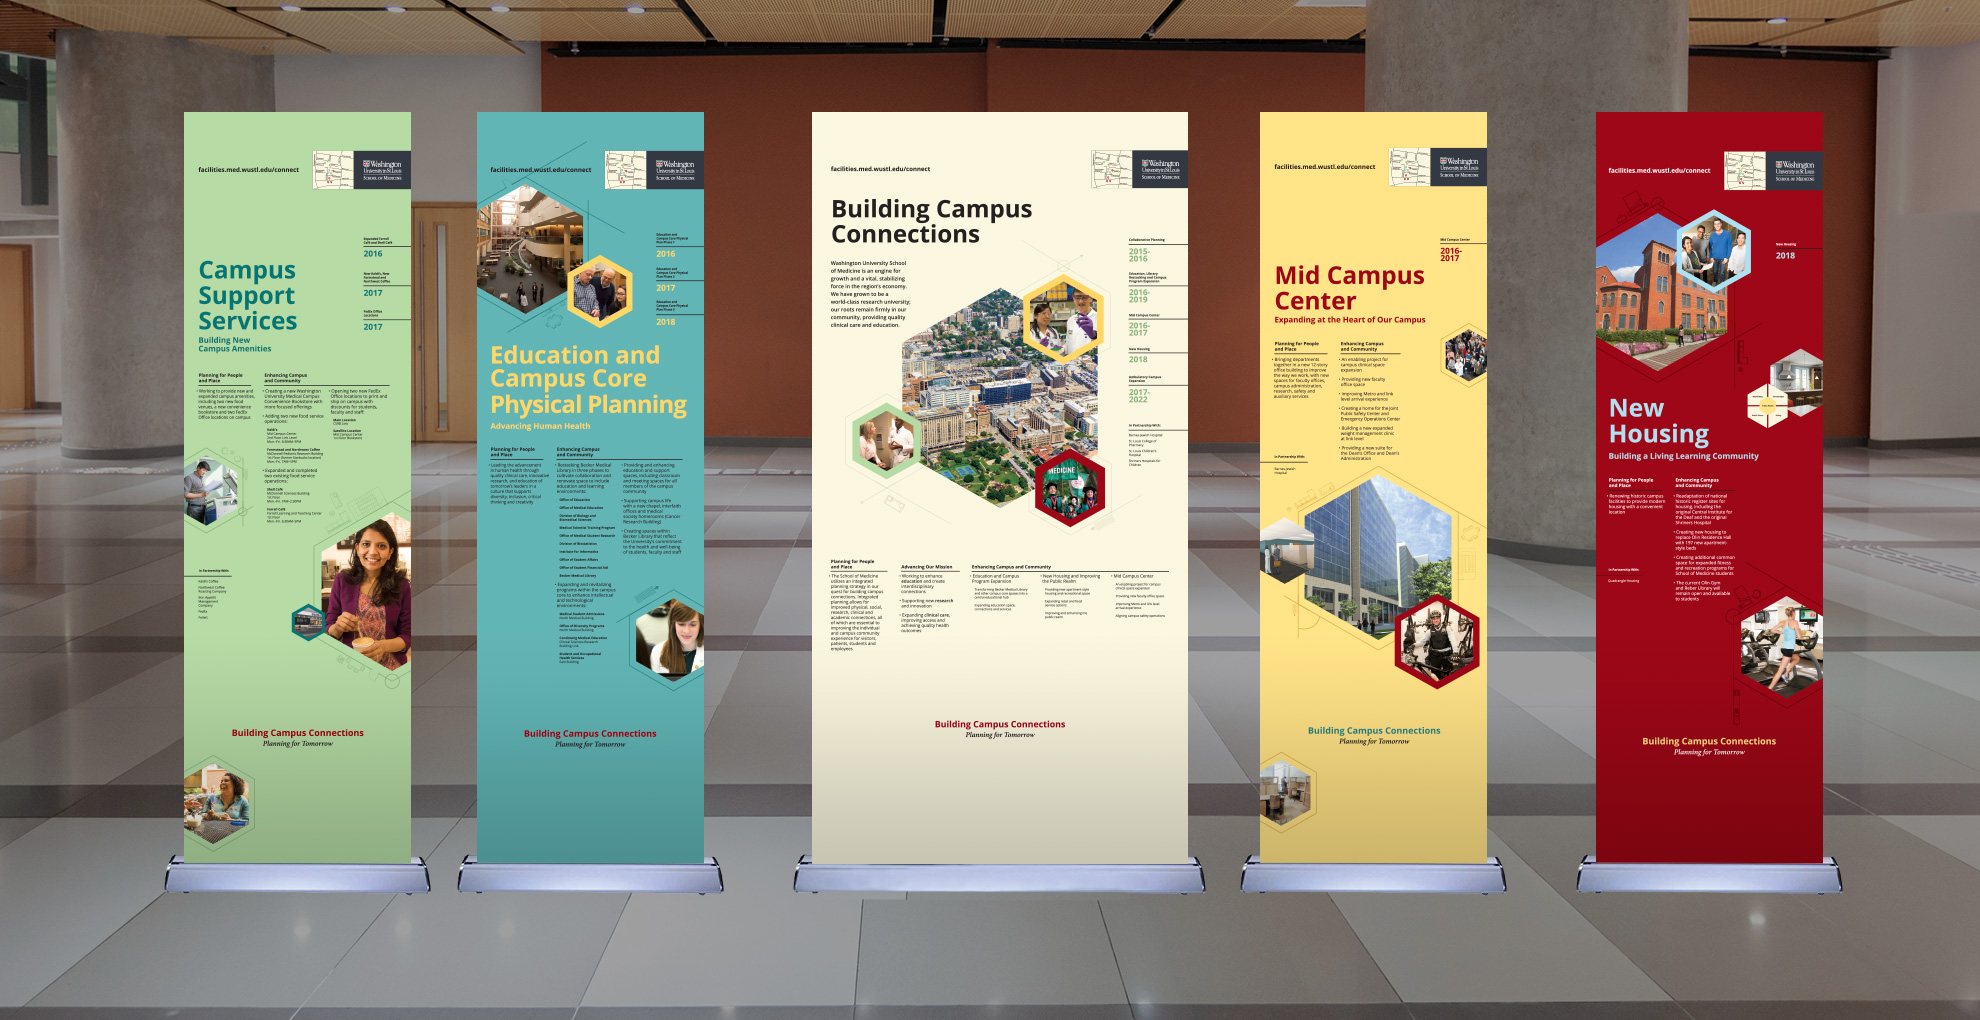 washu-st-louis-building-campus-connections-display